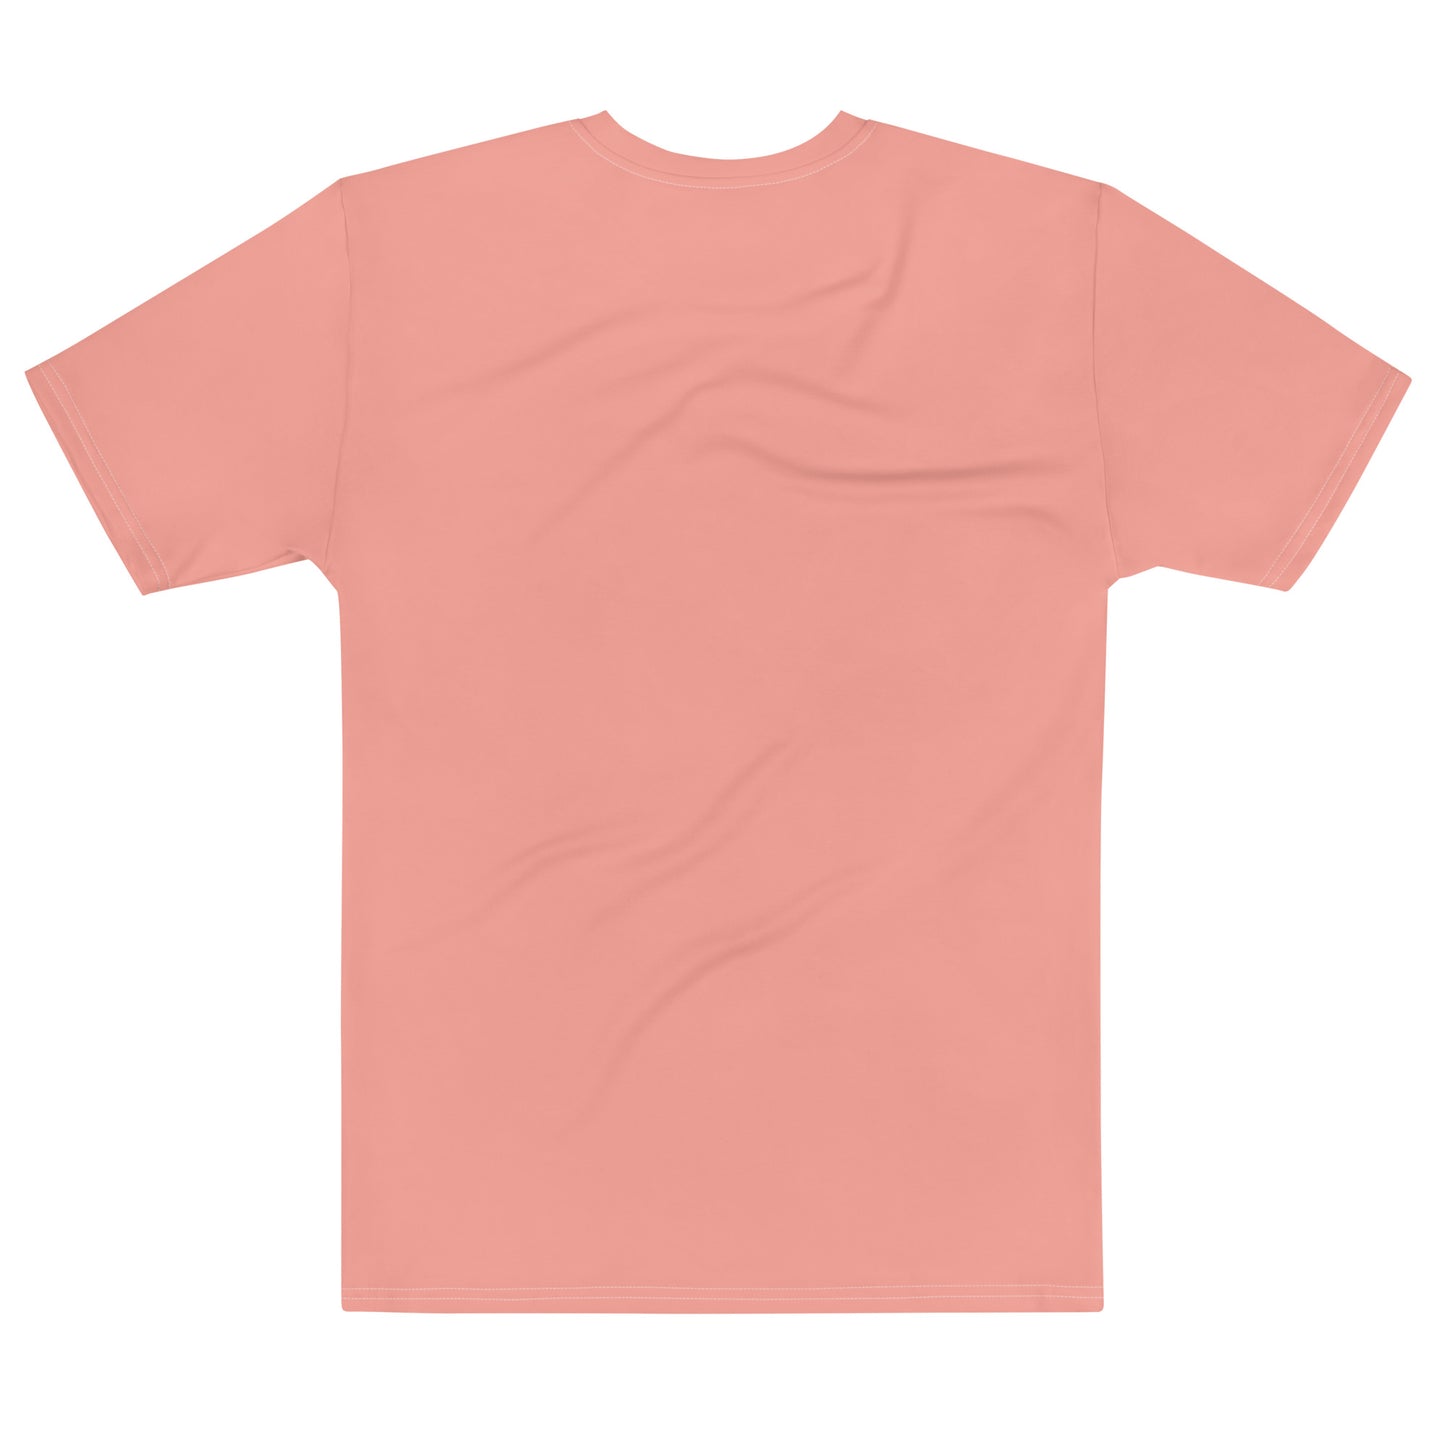 Coral Pink Climate Change Global Warming Statement - Sustainably Made Men's Short Sleeve Tee